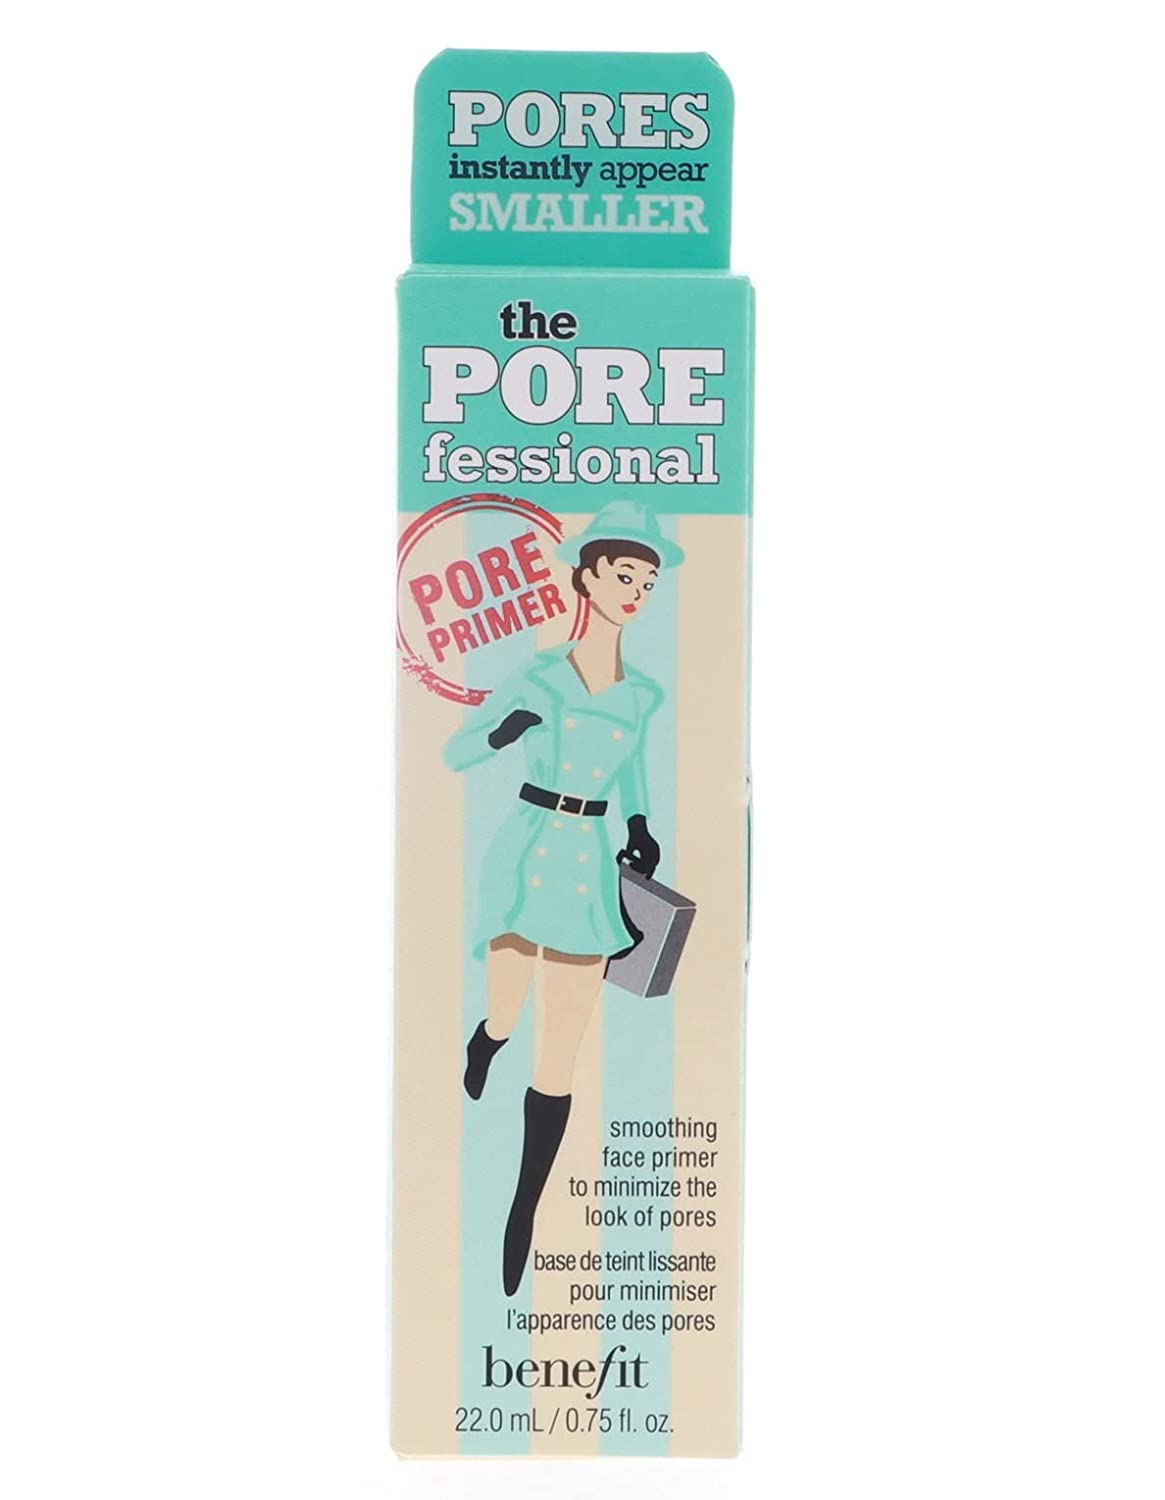 Benefit Cosmetics The POREfessional Pore Minimizing Primers smoothing face primer to minimize the looks of pores and maximize the looks